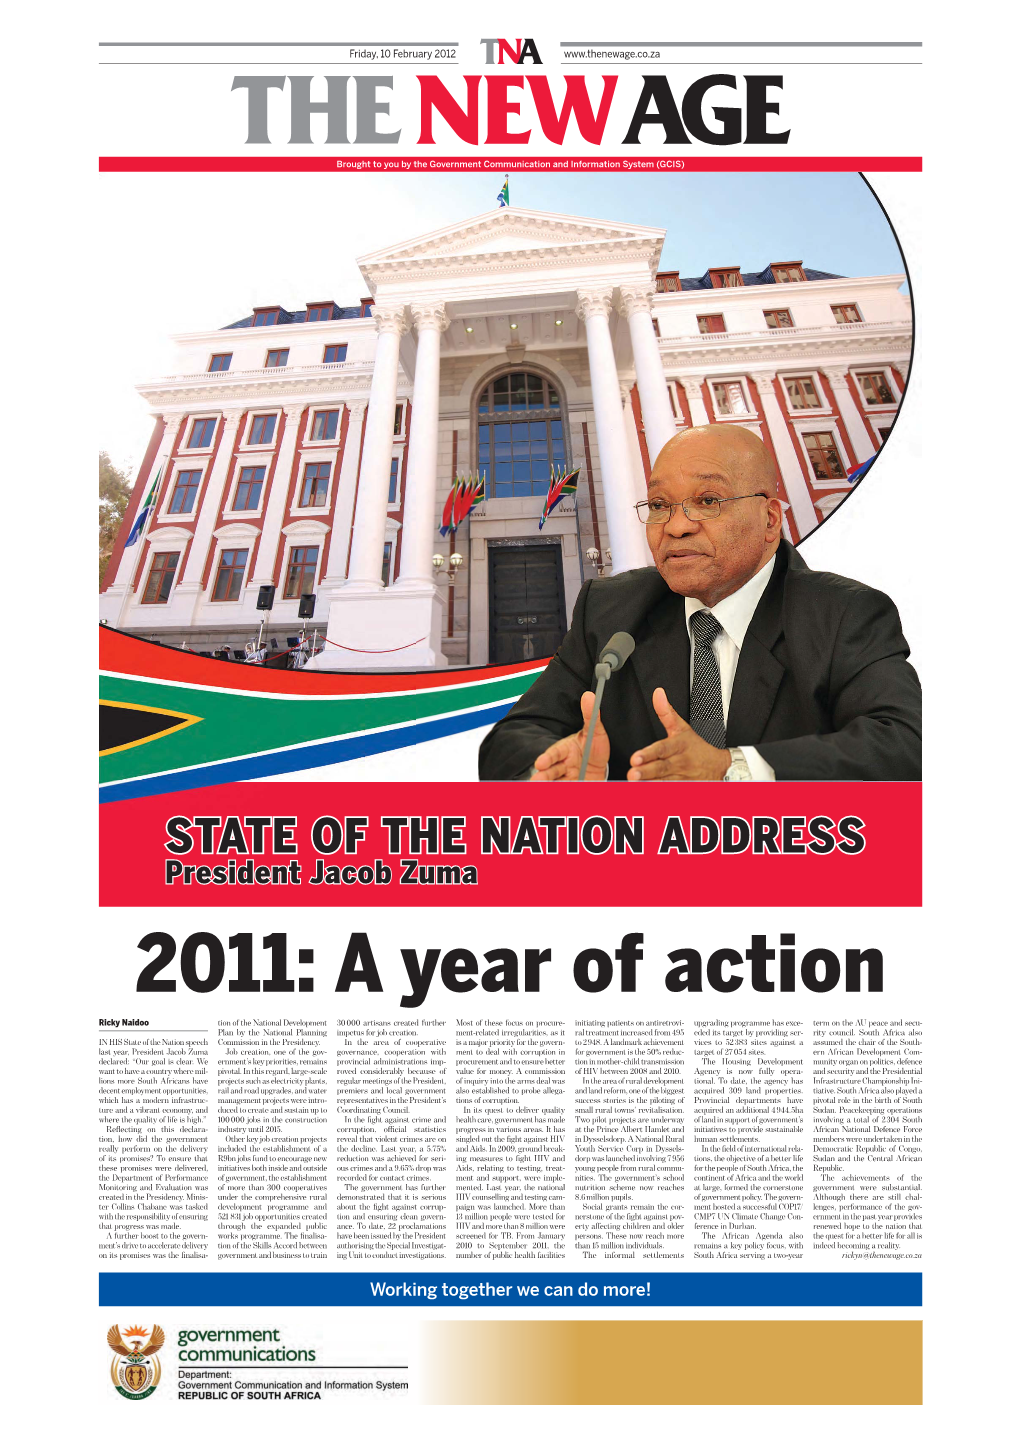 State of the Nation Address Insert in the New